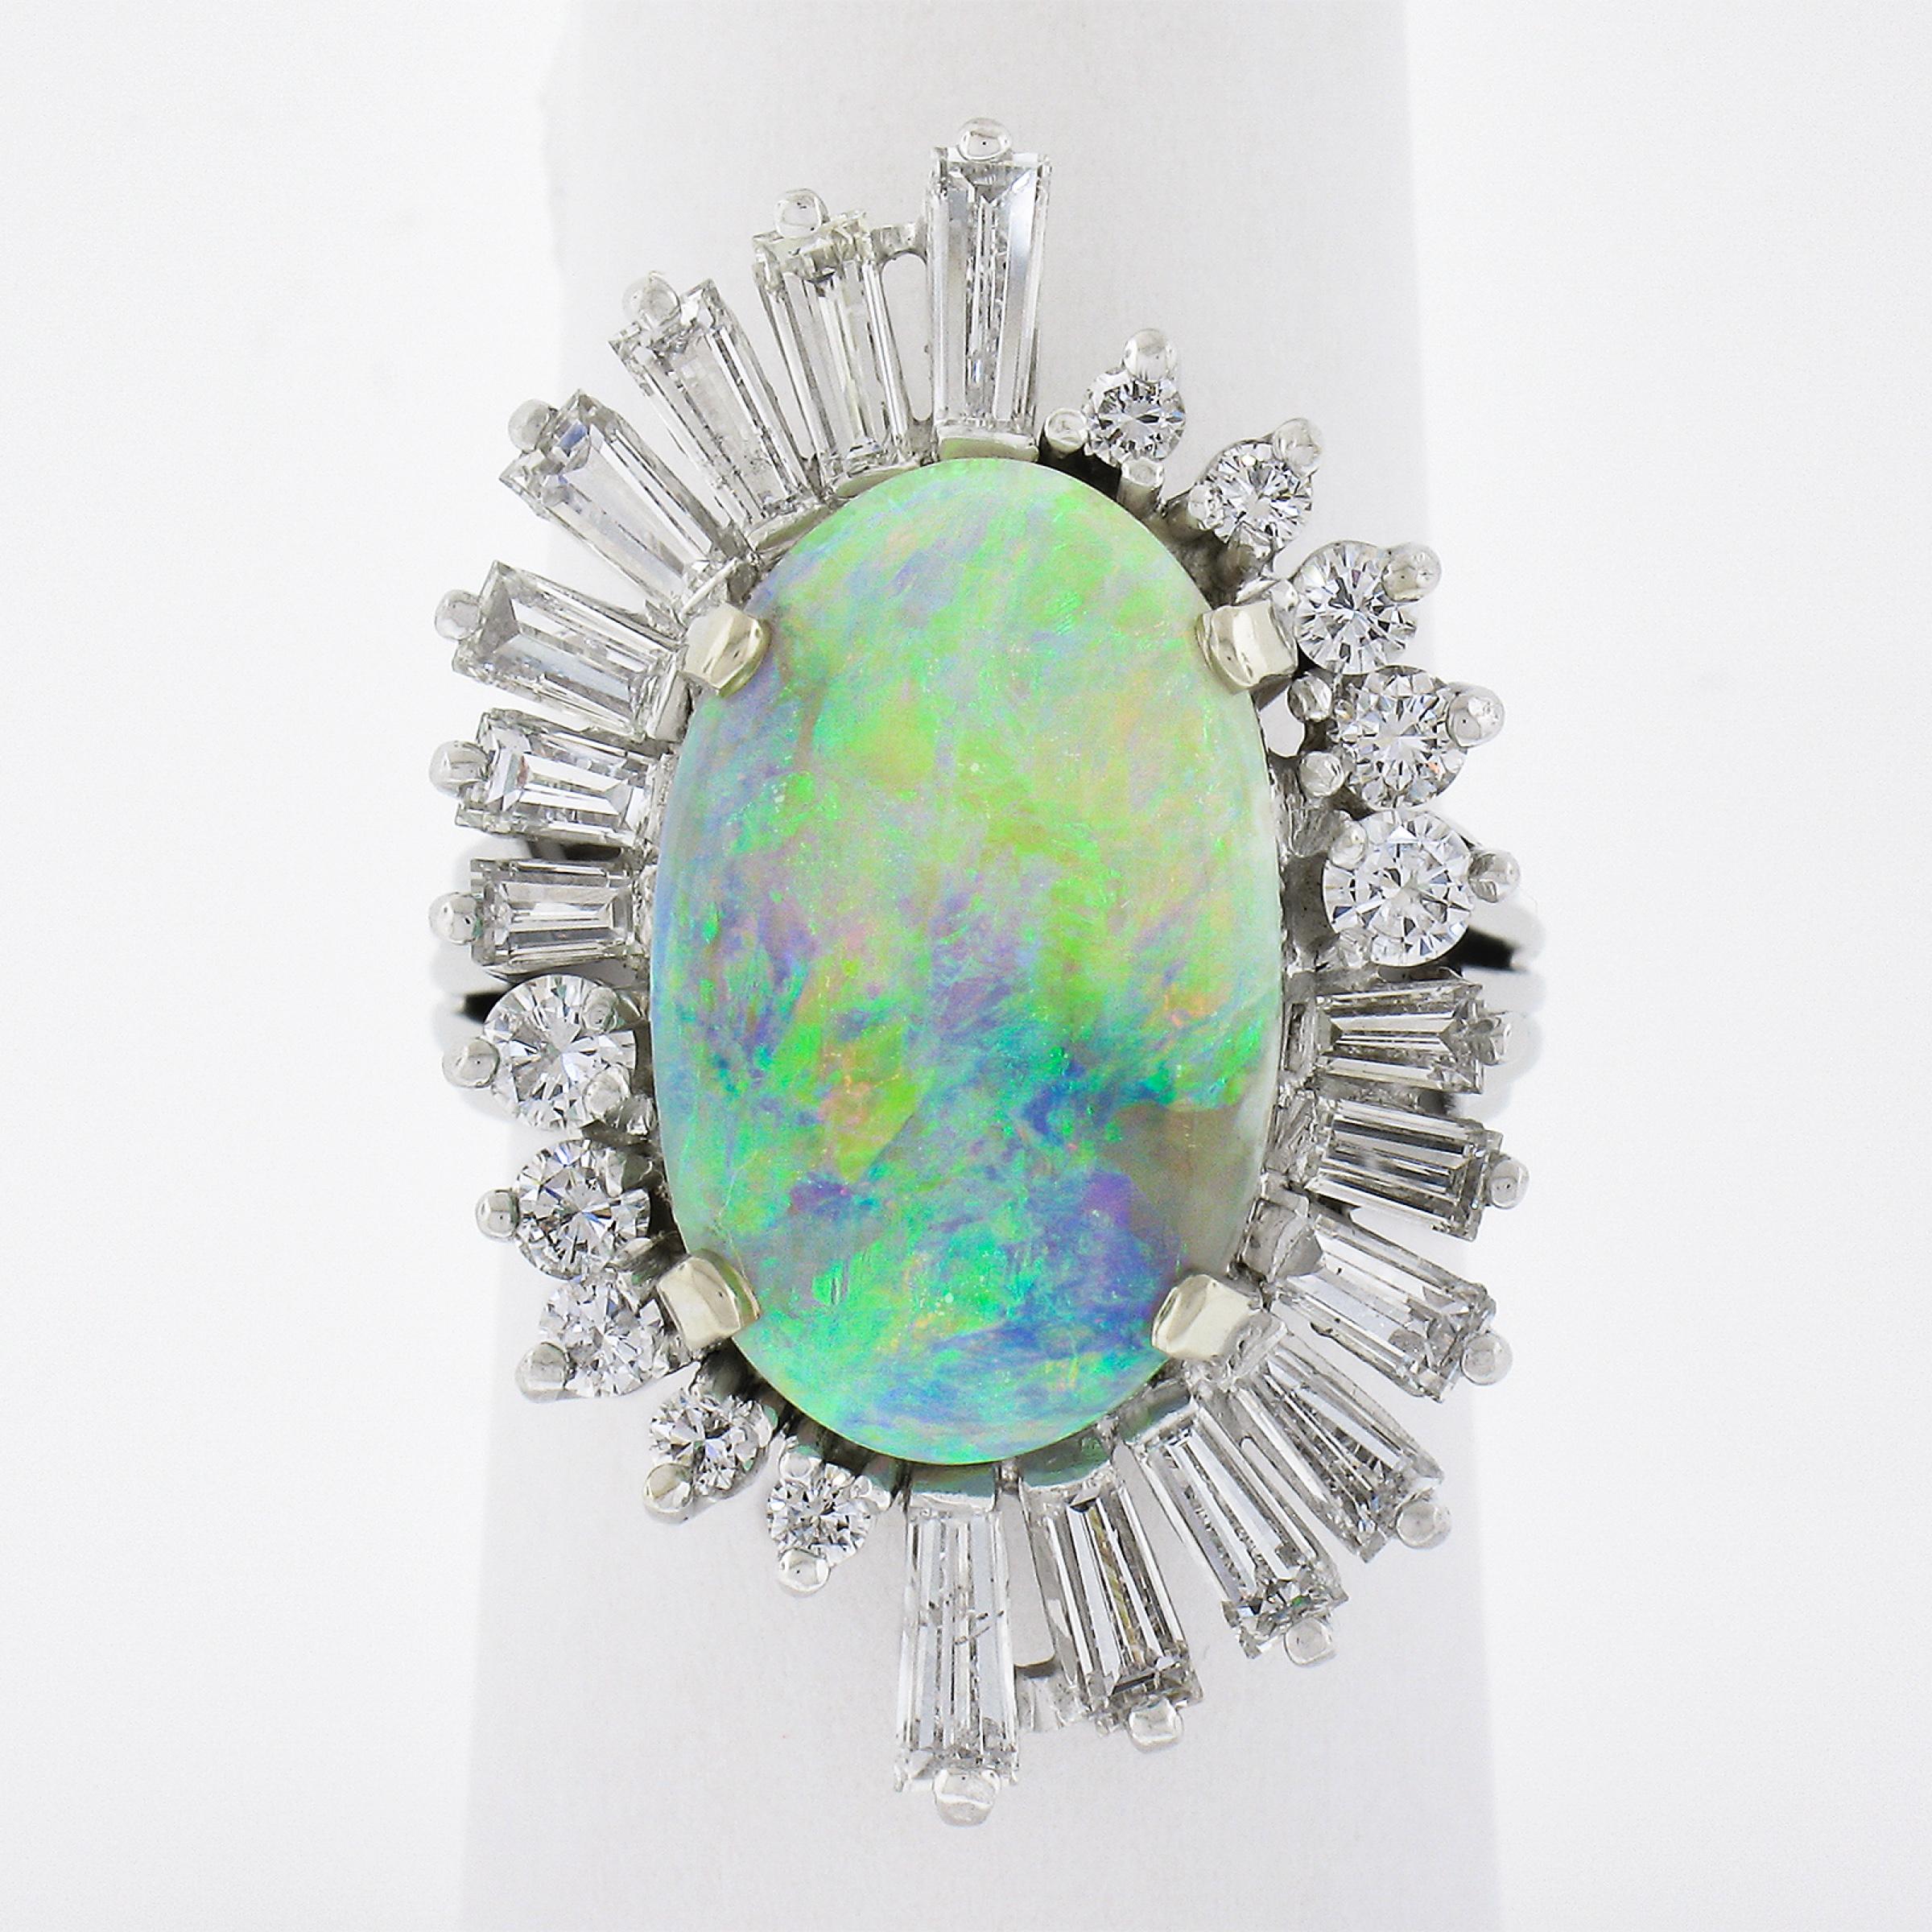 This very fine quality, elongated oval cabochon opal is absolutely magnificent and on fire! It displays sparks and play of purple, yellow, orange, green and red play of color in every lightning condition. Whether you're indoors or enjoying an